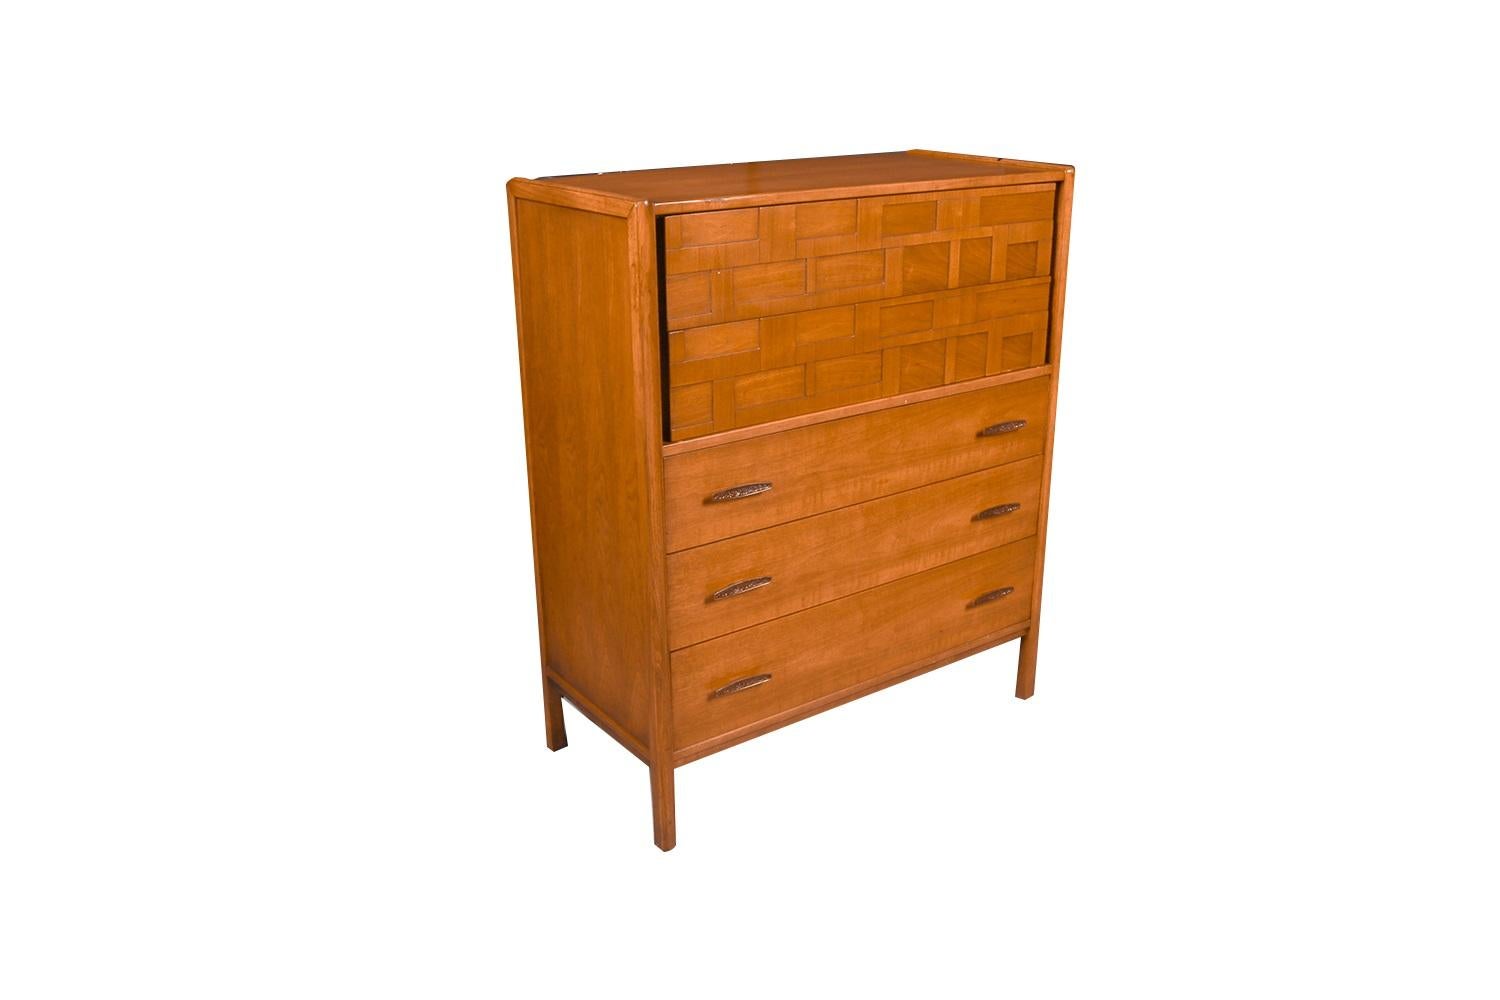 An elegant tallboy dresser. This is a beautiful example of Mid-Century craftsmanship. This retro piece was constructed with top of the line hardware, and excellently crafted woodwork. Features solid hardwood, with walnut and weave pattern finish.